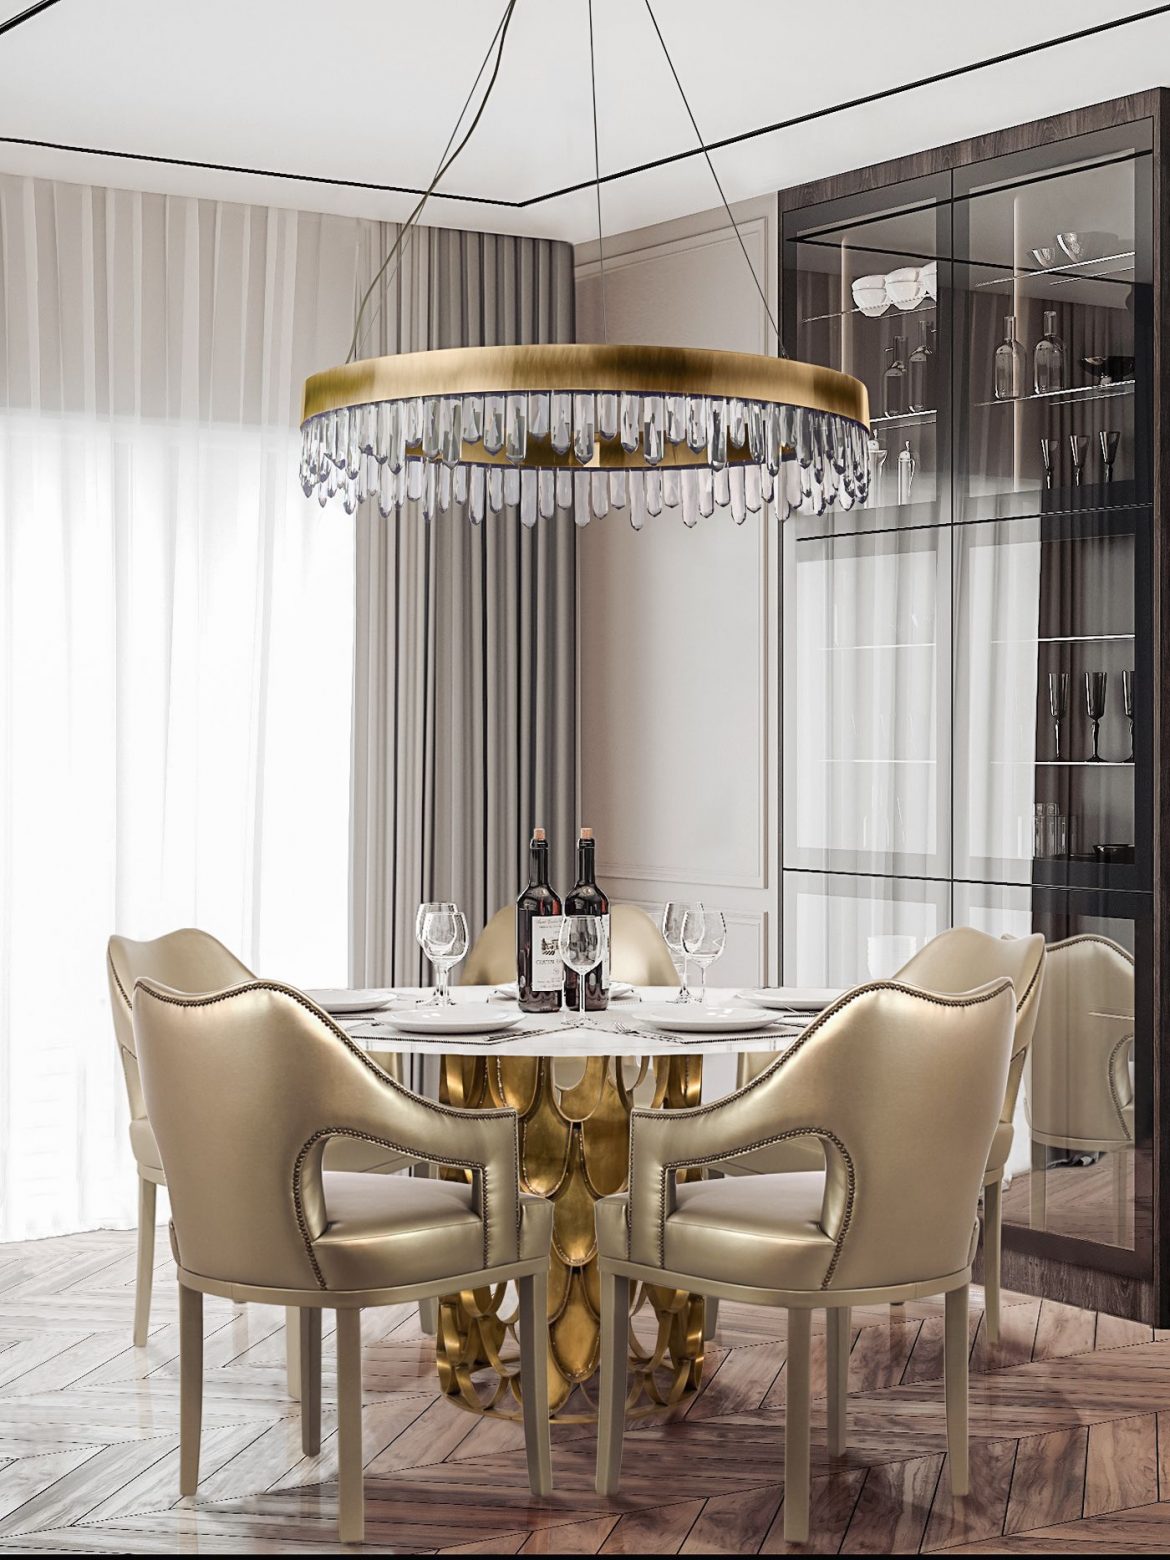 Kitchen and Dining Room ideas to get inspired by contemporary cream and gold dining room